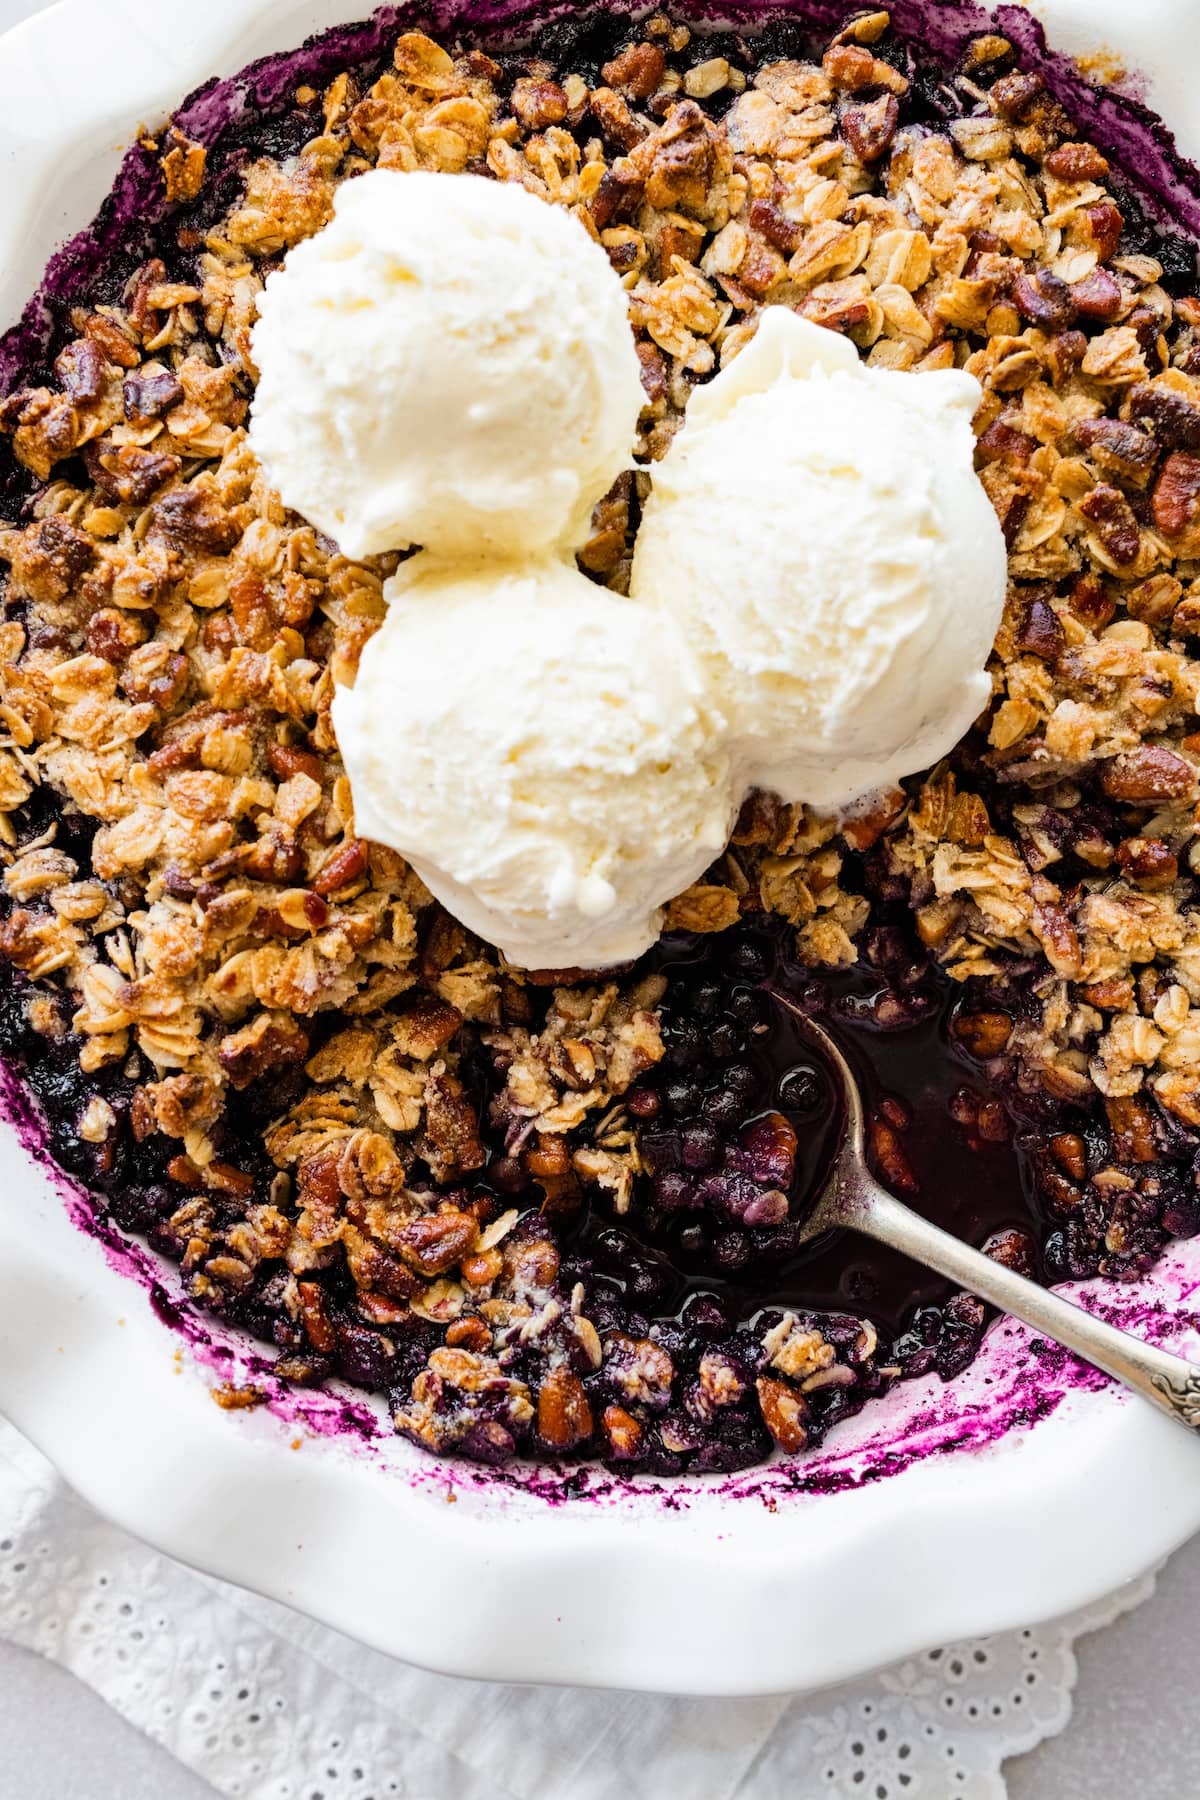 Blueberry Crumble in a pie dish with three scoops of vanilla ice cream on top and a metal spoon.